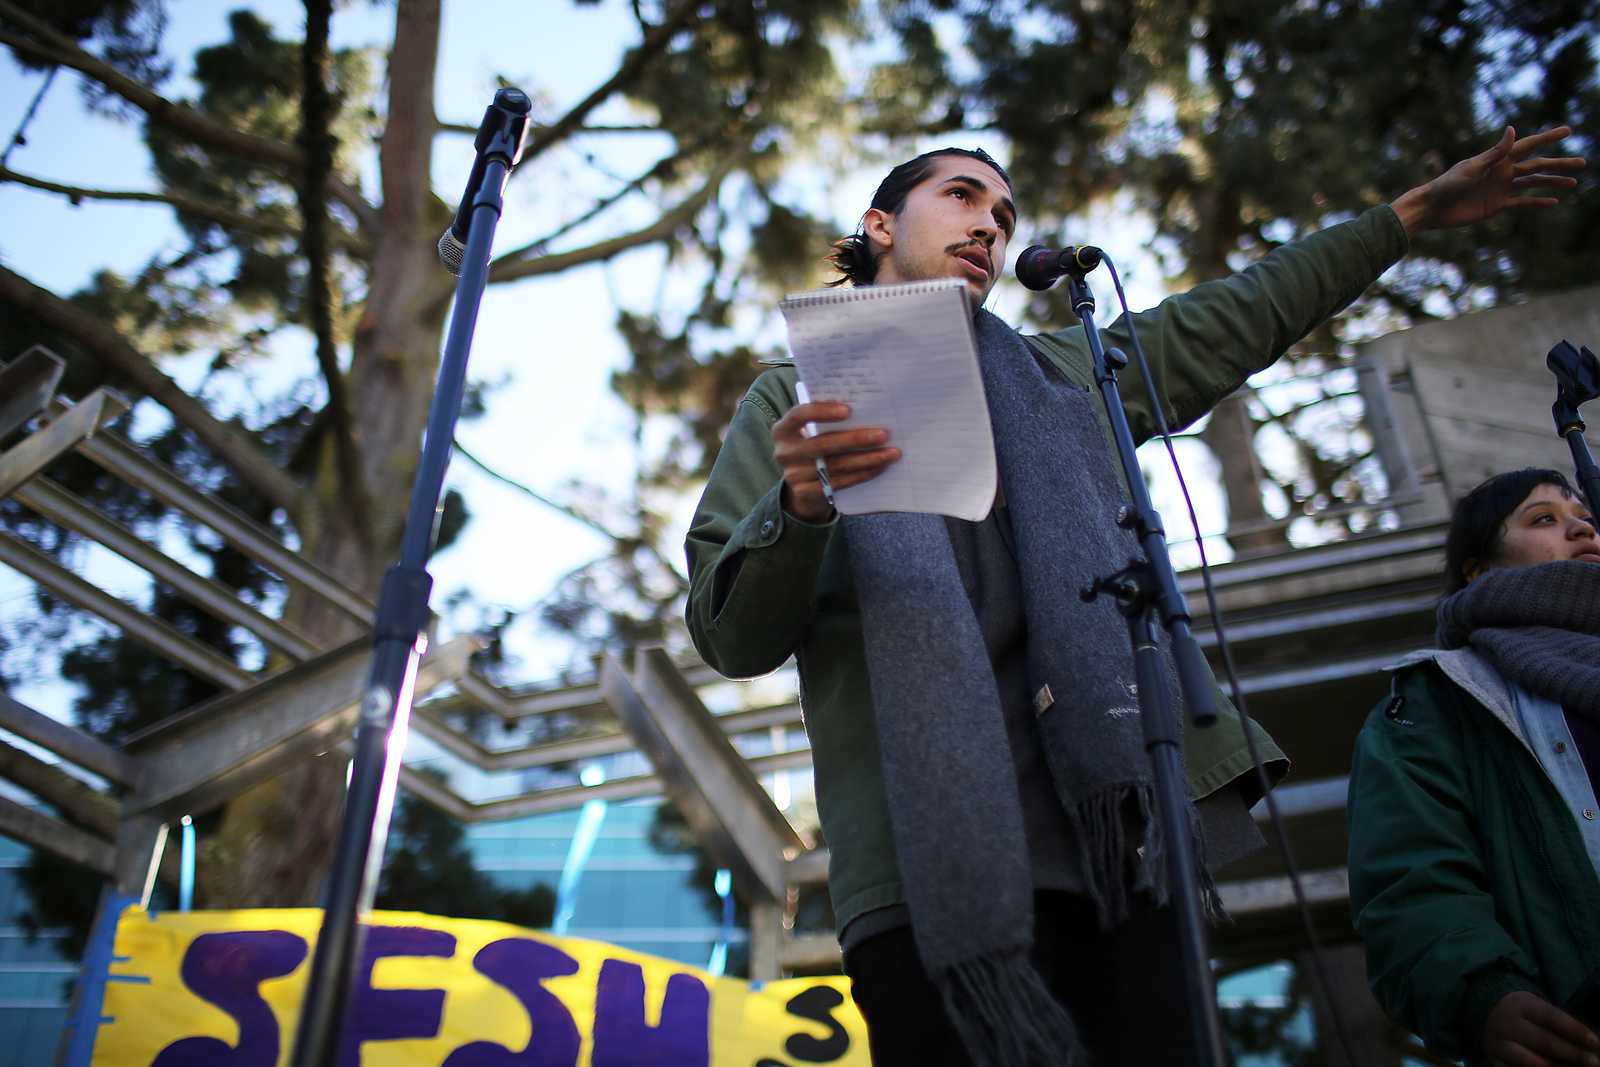 Michael Sanchez speaks to students about Tasers in Malcolm X Plaza during a rally Dec. 5. The rally was organized by a group of student organizations. Photo by John Ornelas / Xpress.